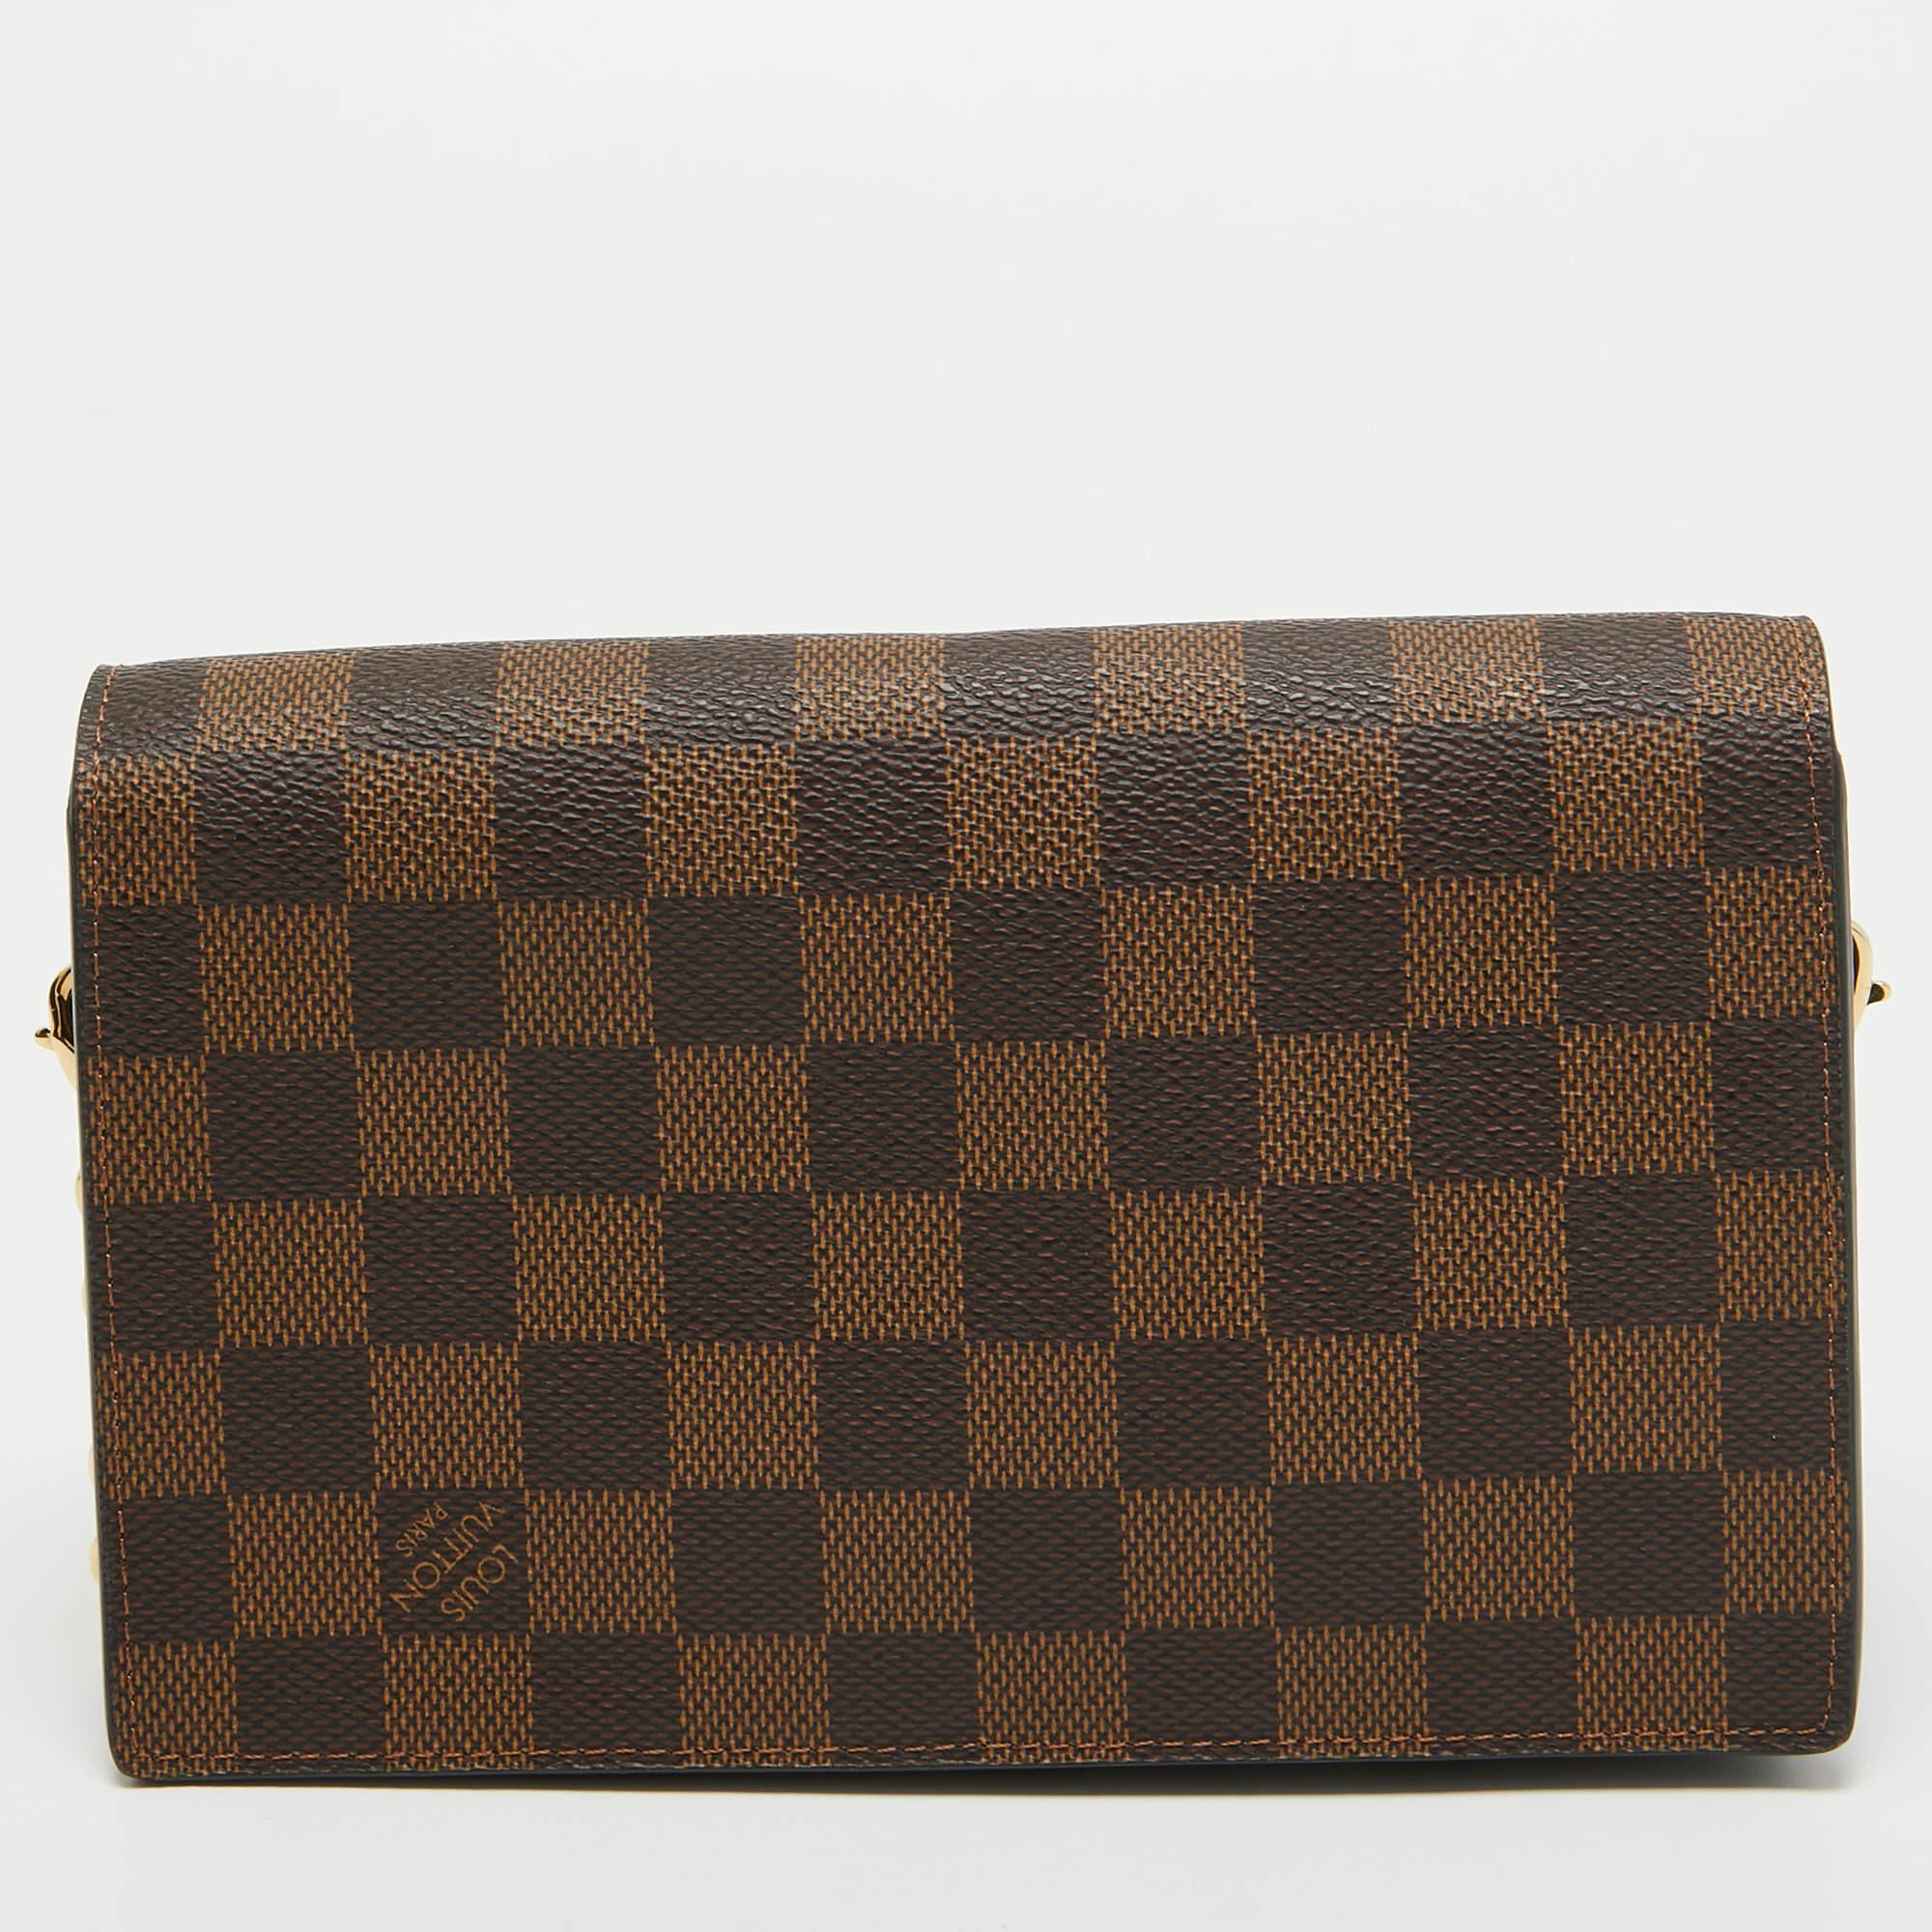 The Louis Vuitton Vavin Chain Wallet exudes sophistication with its signature brown checkered Damier Ebene pattern on coated canvas. The compact design features a gold-tone chain strap, multiple card slots, and a zippered pocket, seamlessly blending